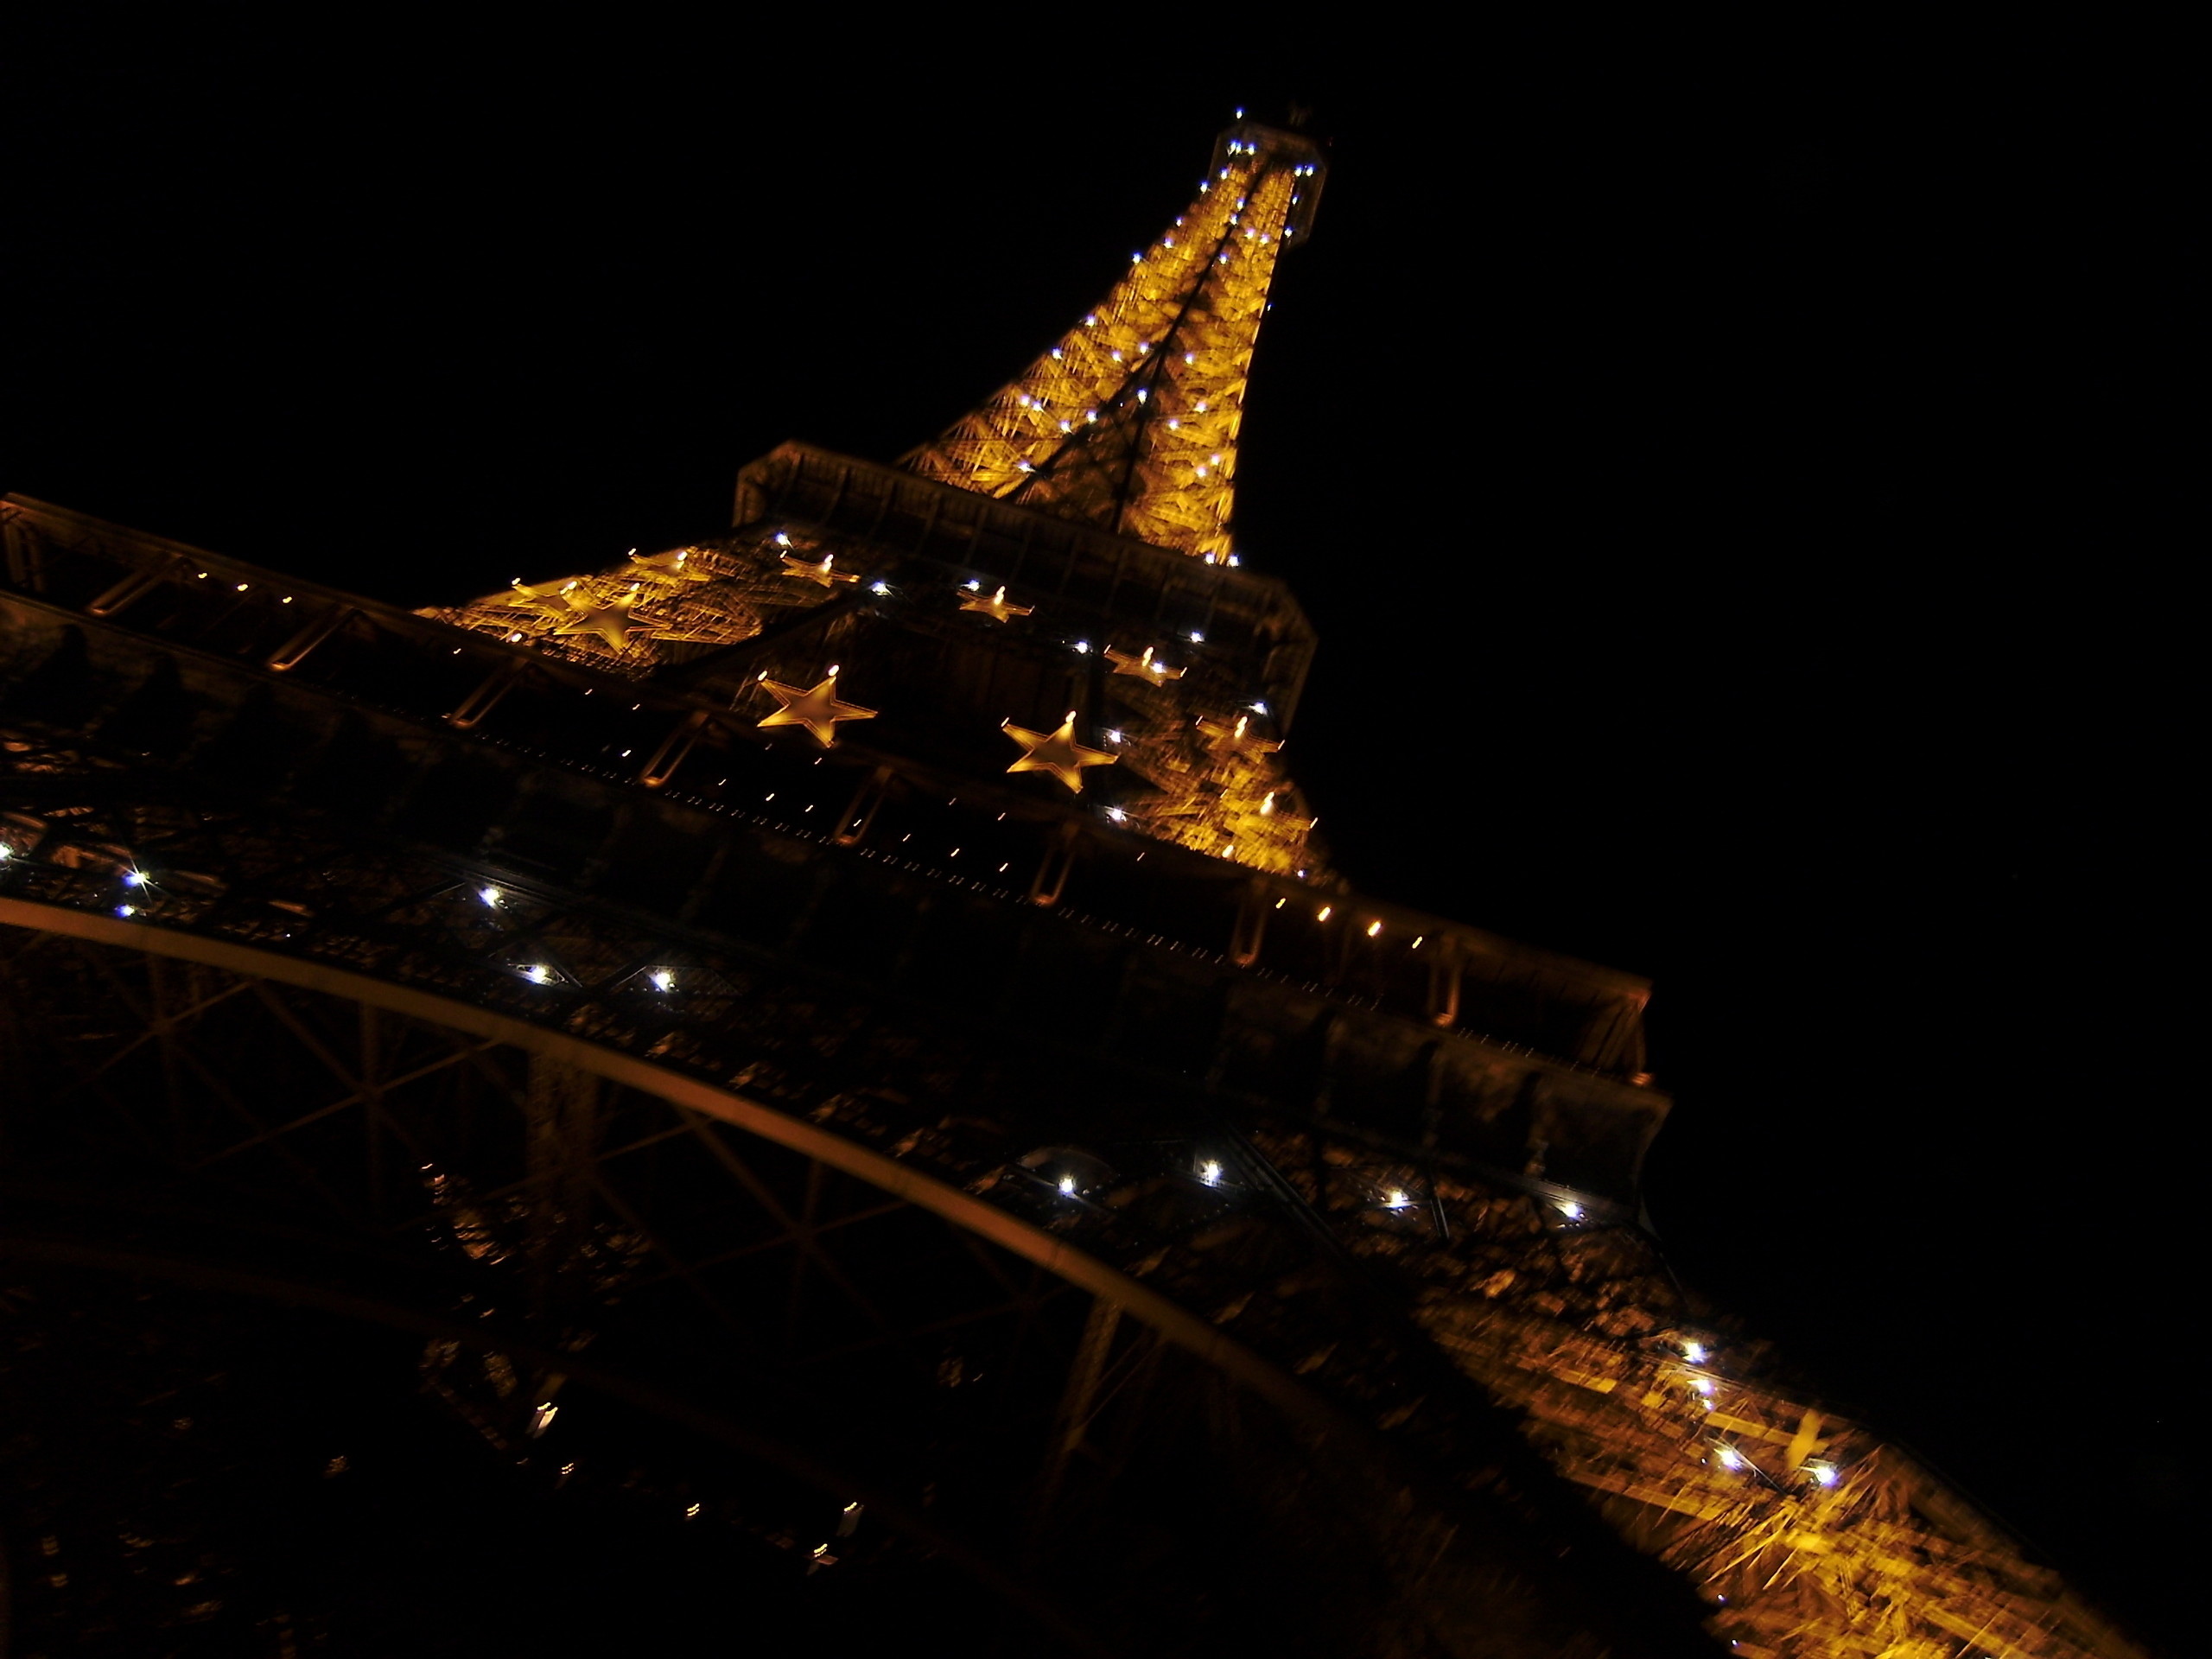 2560x1920 Europe images Eiffel Tower By Night, Paris, France HD wallpaper and  background photos